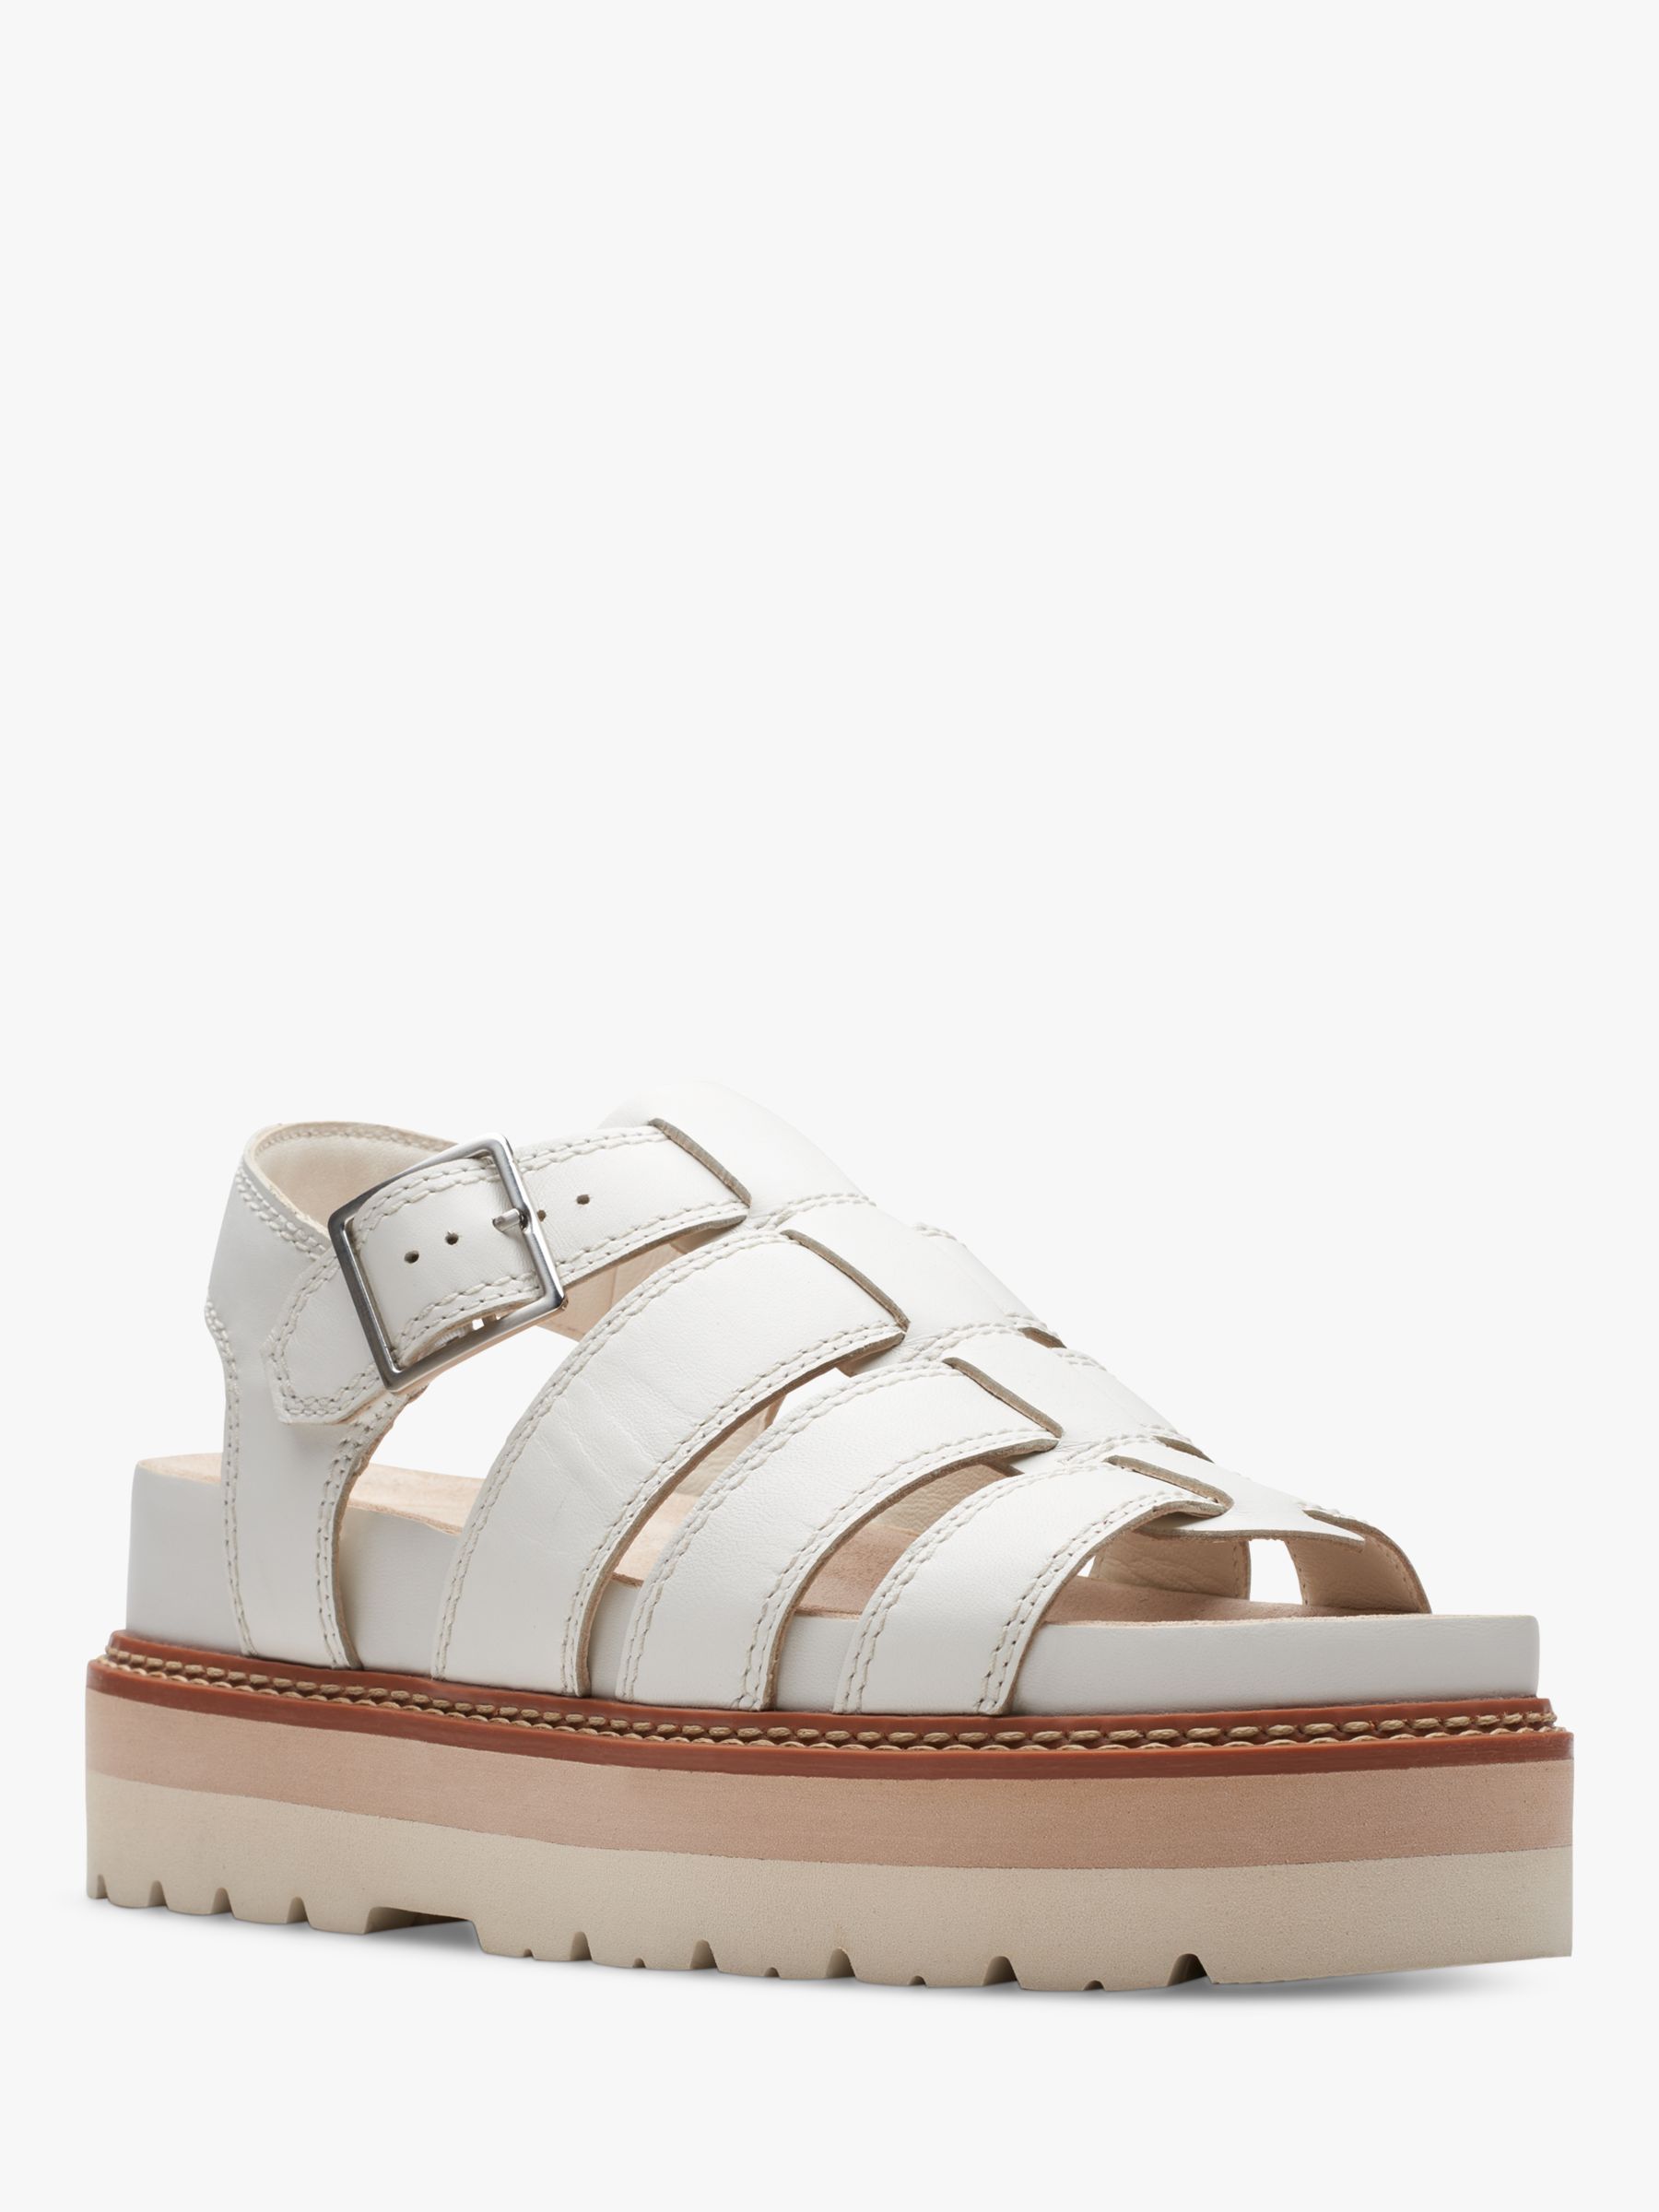 Clarks Orianna Twist Leather Caged Sandals, Off White Lea at John Lewis ...